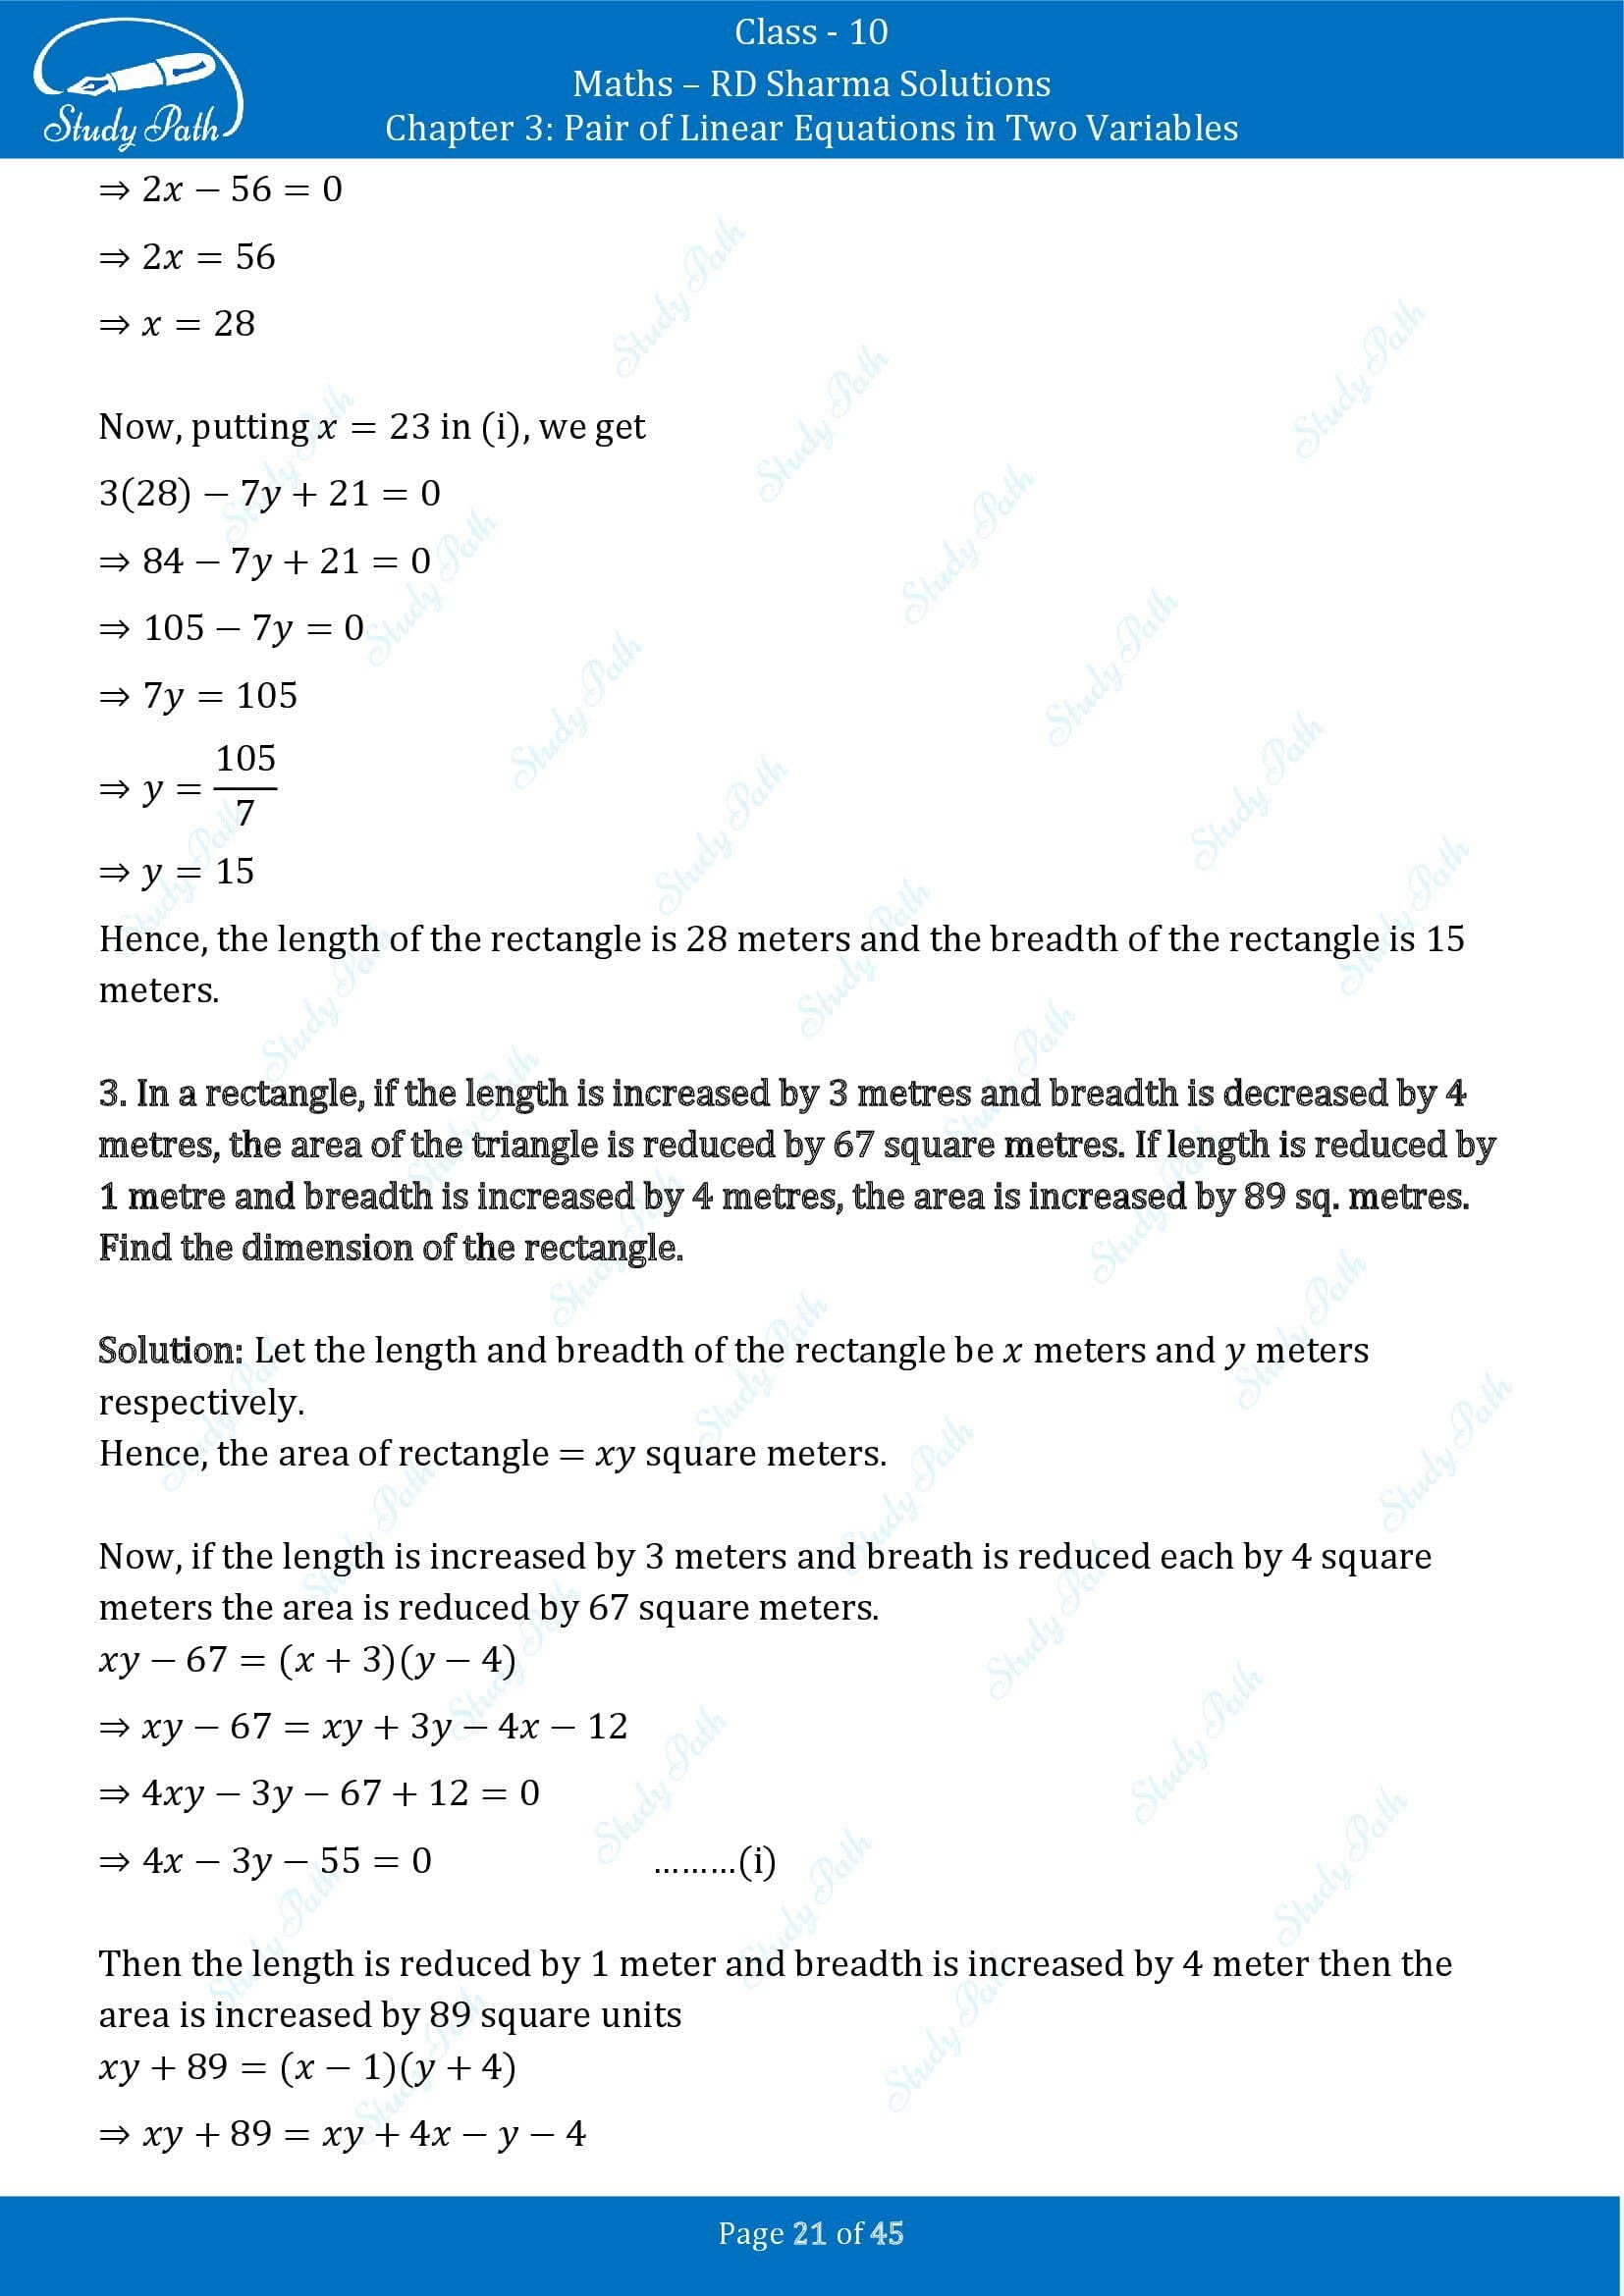 RD Sharma Solutions Class 10 Chapter 3 Pair of Linear Equations in Two Variables Exercise 3.11 00021